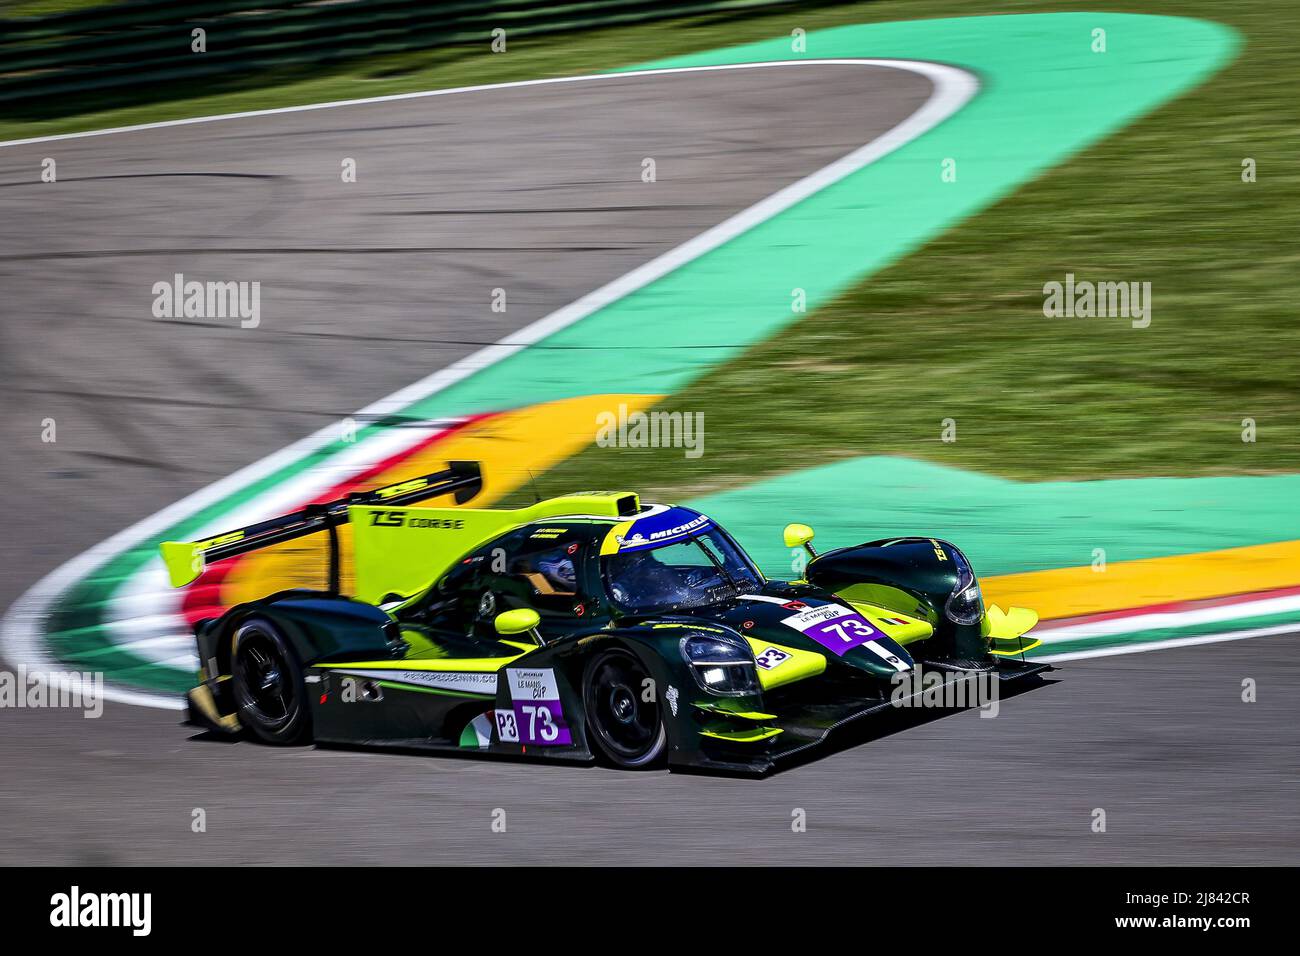 04 Horr Laurents (deu), Berg Alain (lux), DKR Engineering, Duqueine M30 -  D08 - Nissan, action during the 2021 4 Hours of Monza, 4th round of the  2021 European Le Mans Series